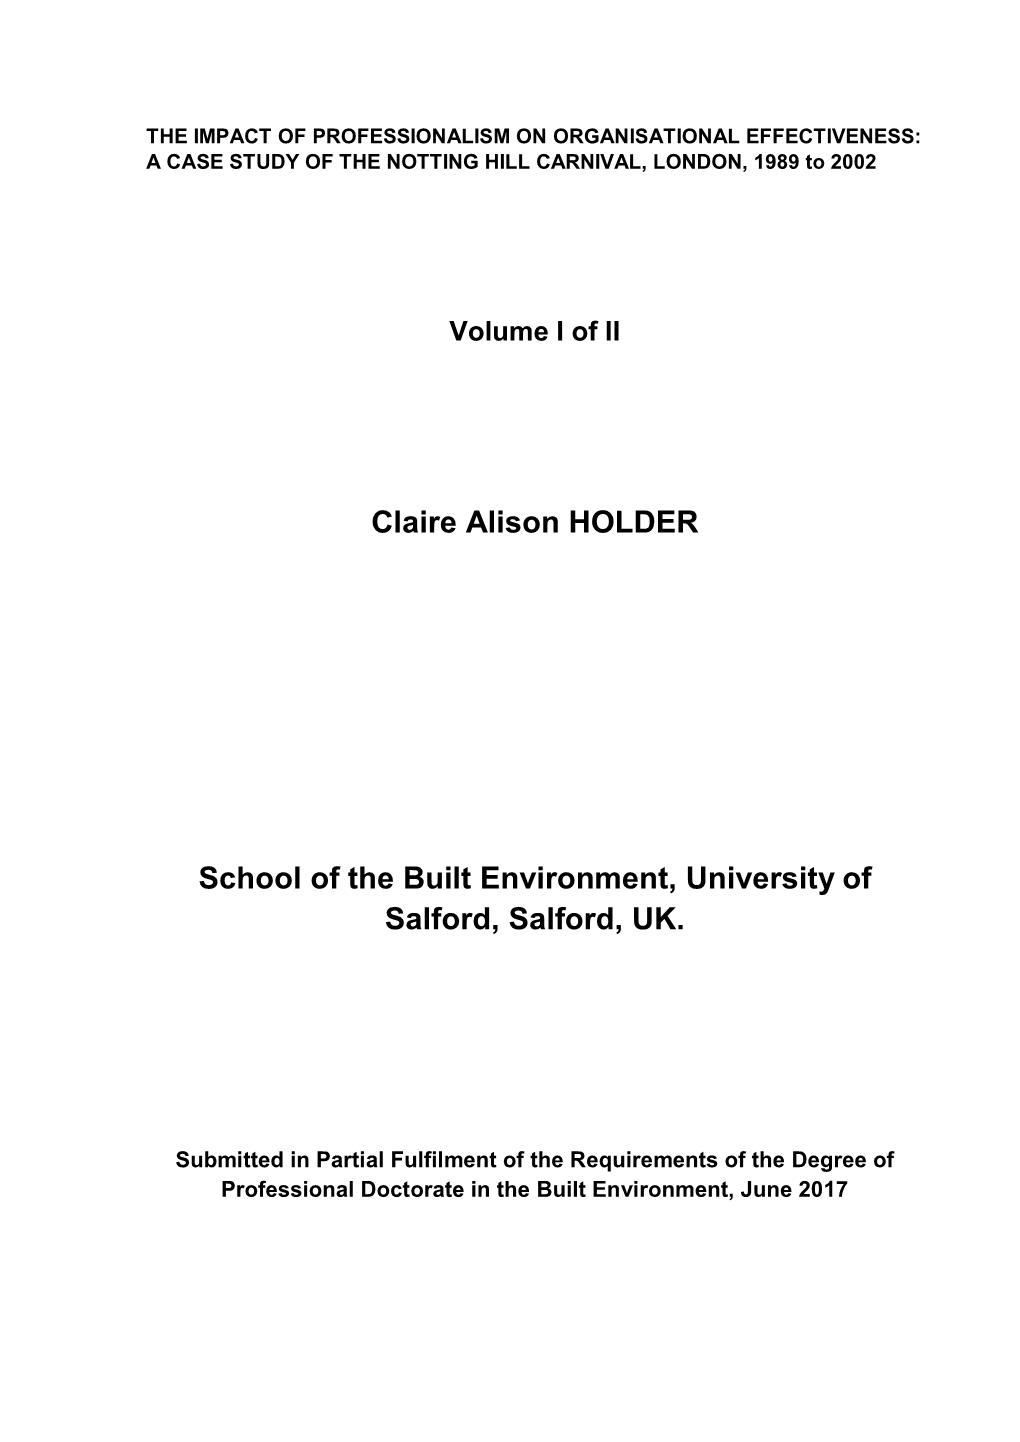 Claire Alison HOLDER School of the Built Environment, University of Salford, Salford